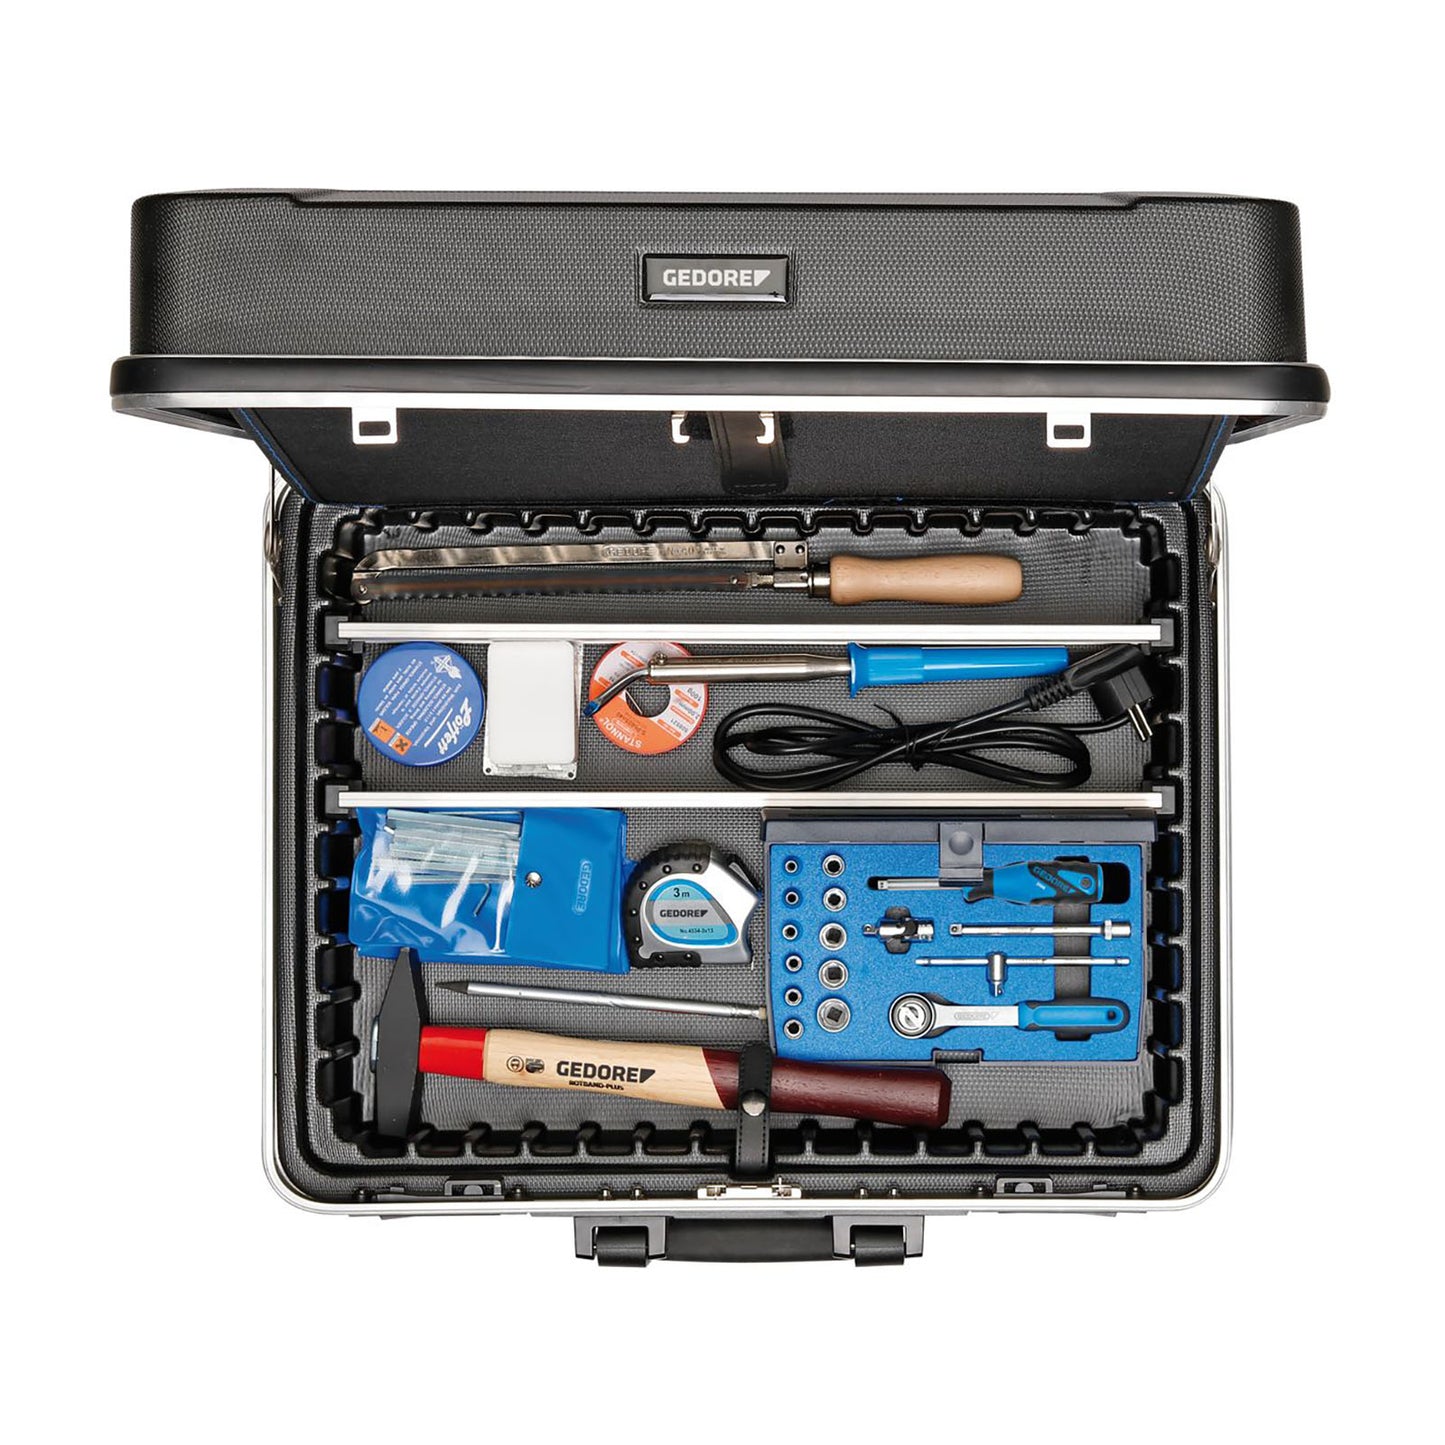 GEDORE 1090 - Electrician tools suitcase (6601590)